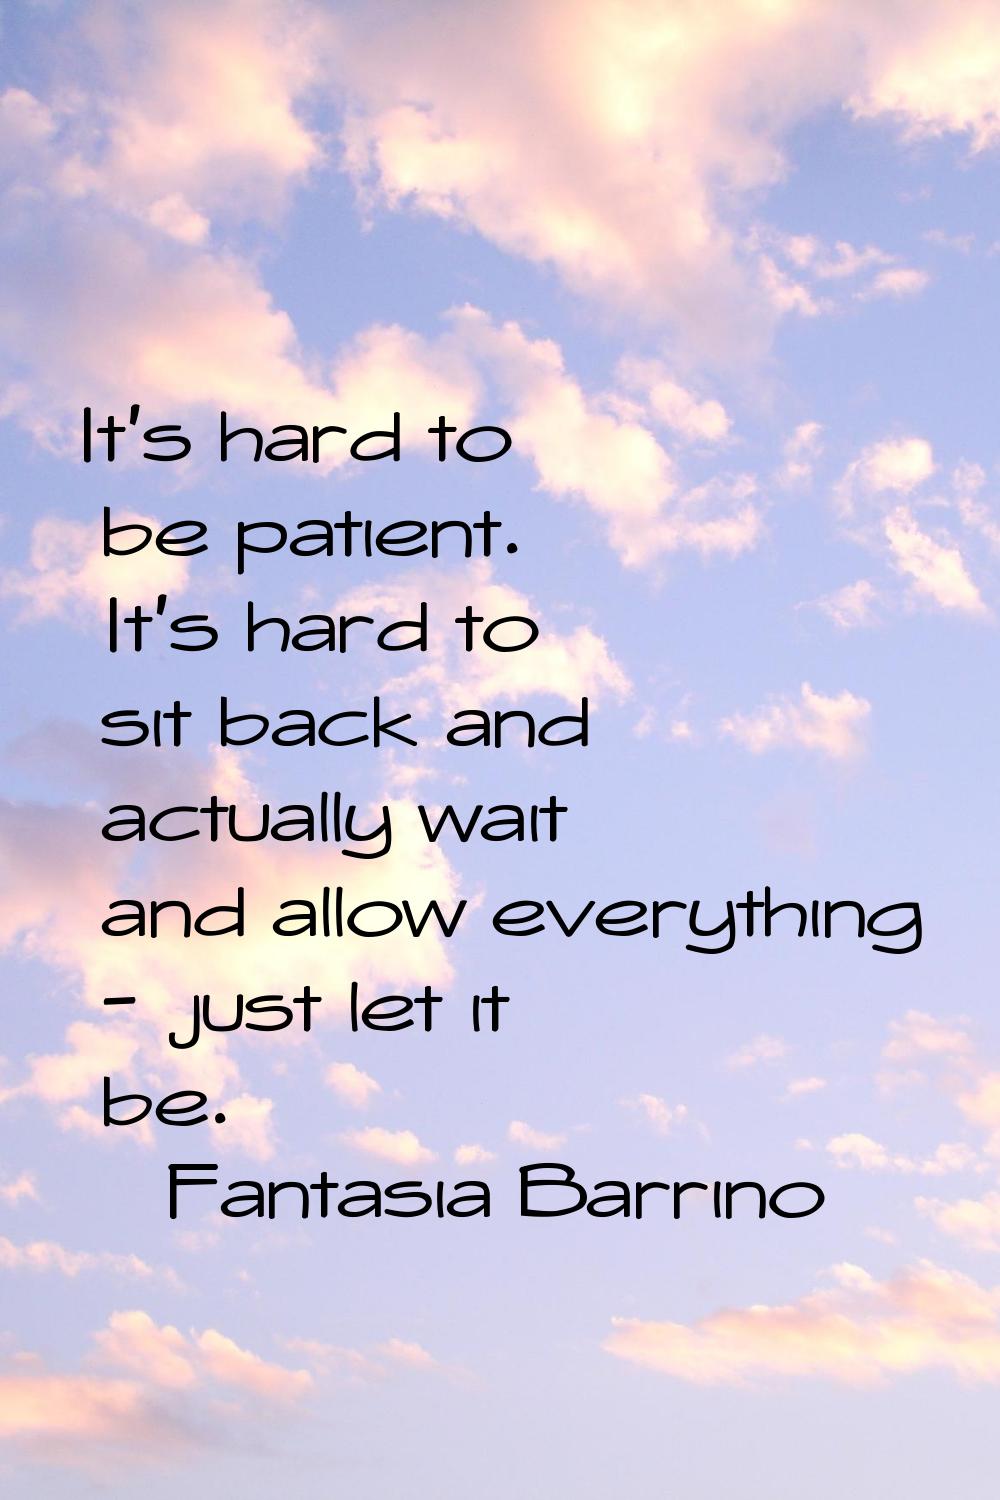 It's hard to be patient. It's hard to sit back and actually wait and allow everything - just let it